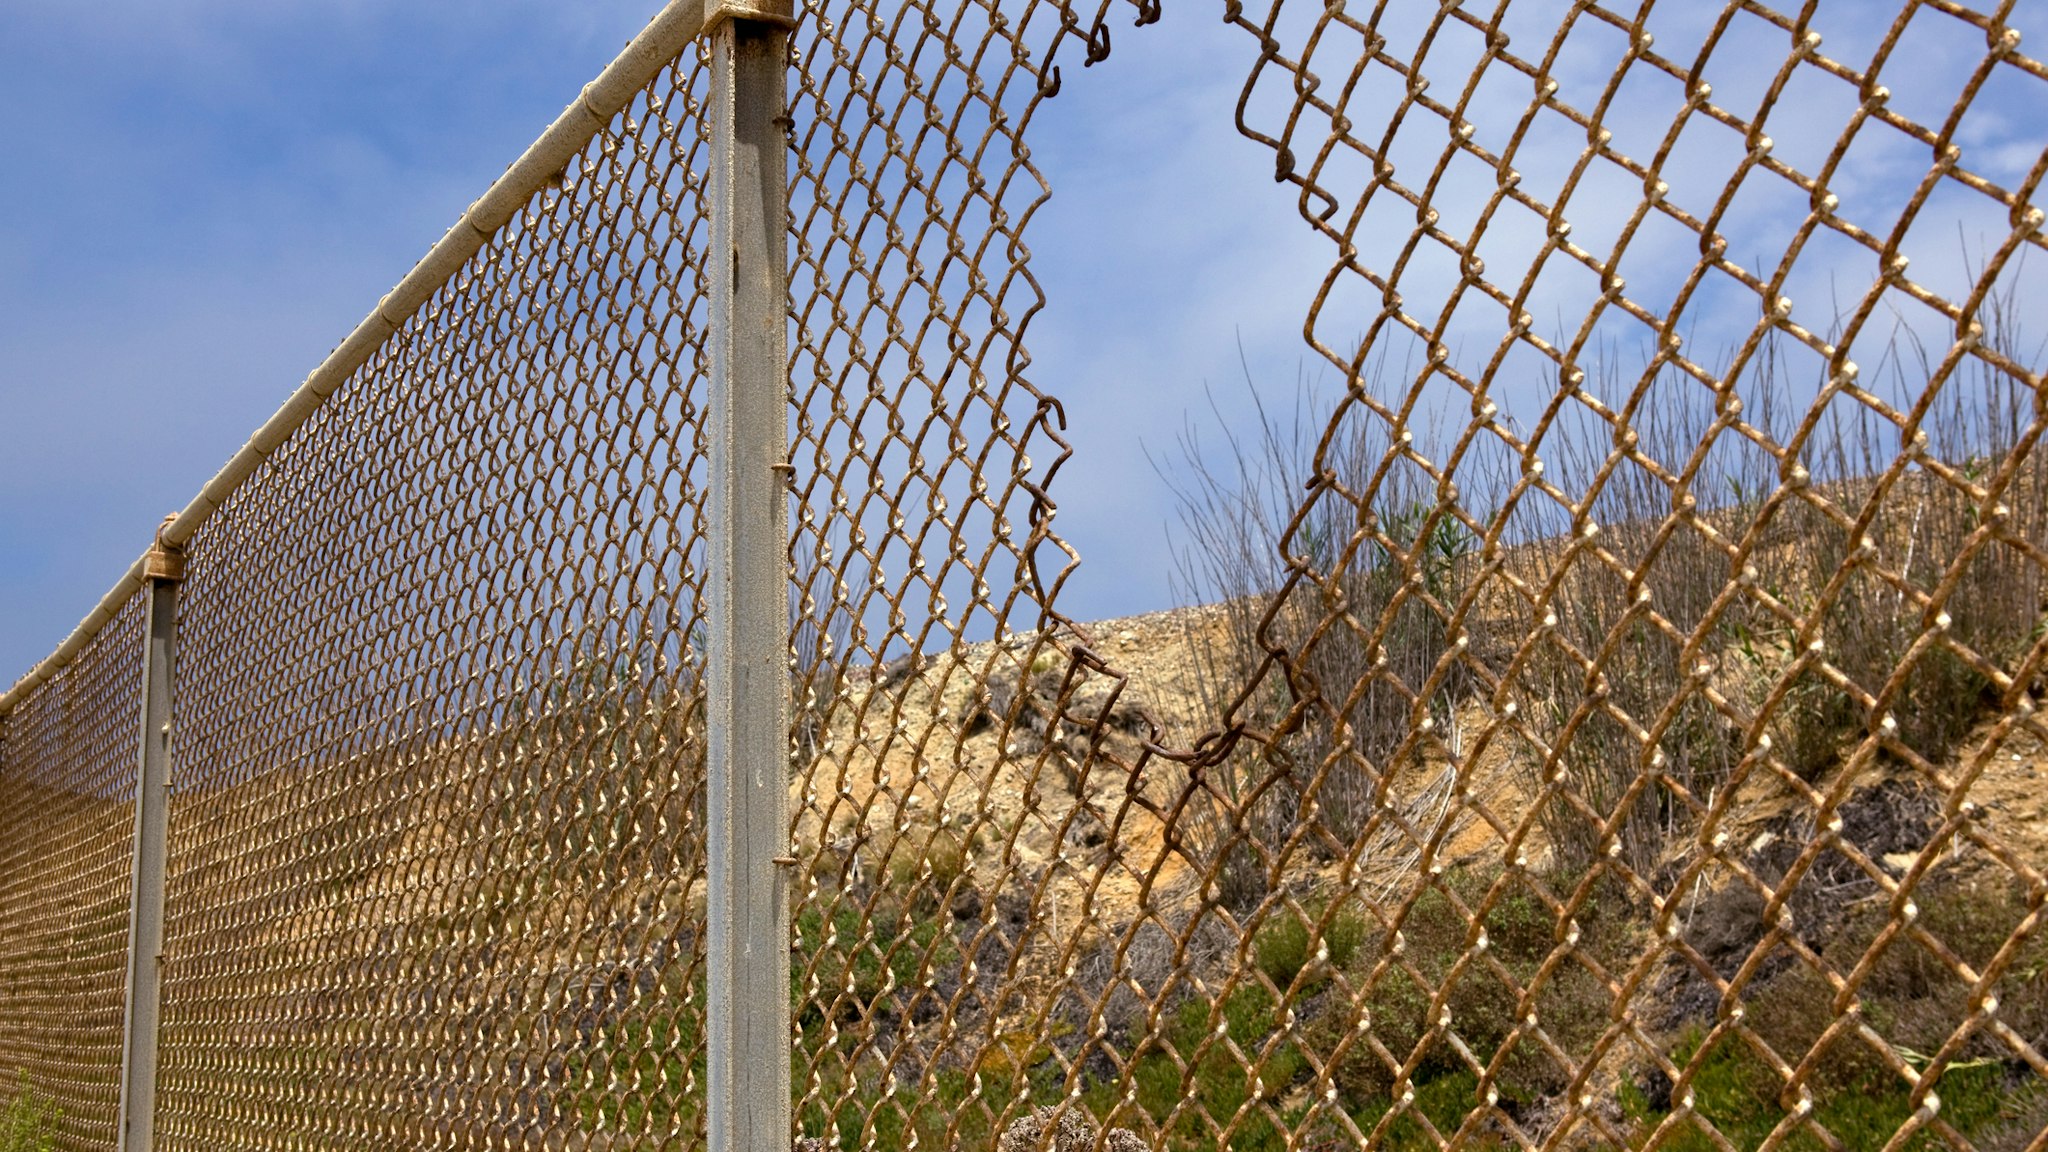 Fence with hole in California desert.